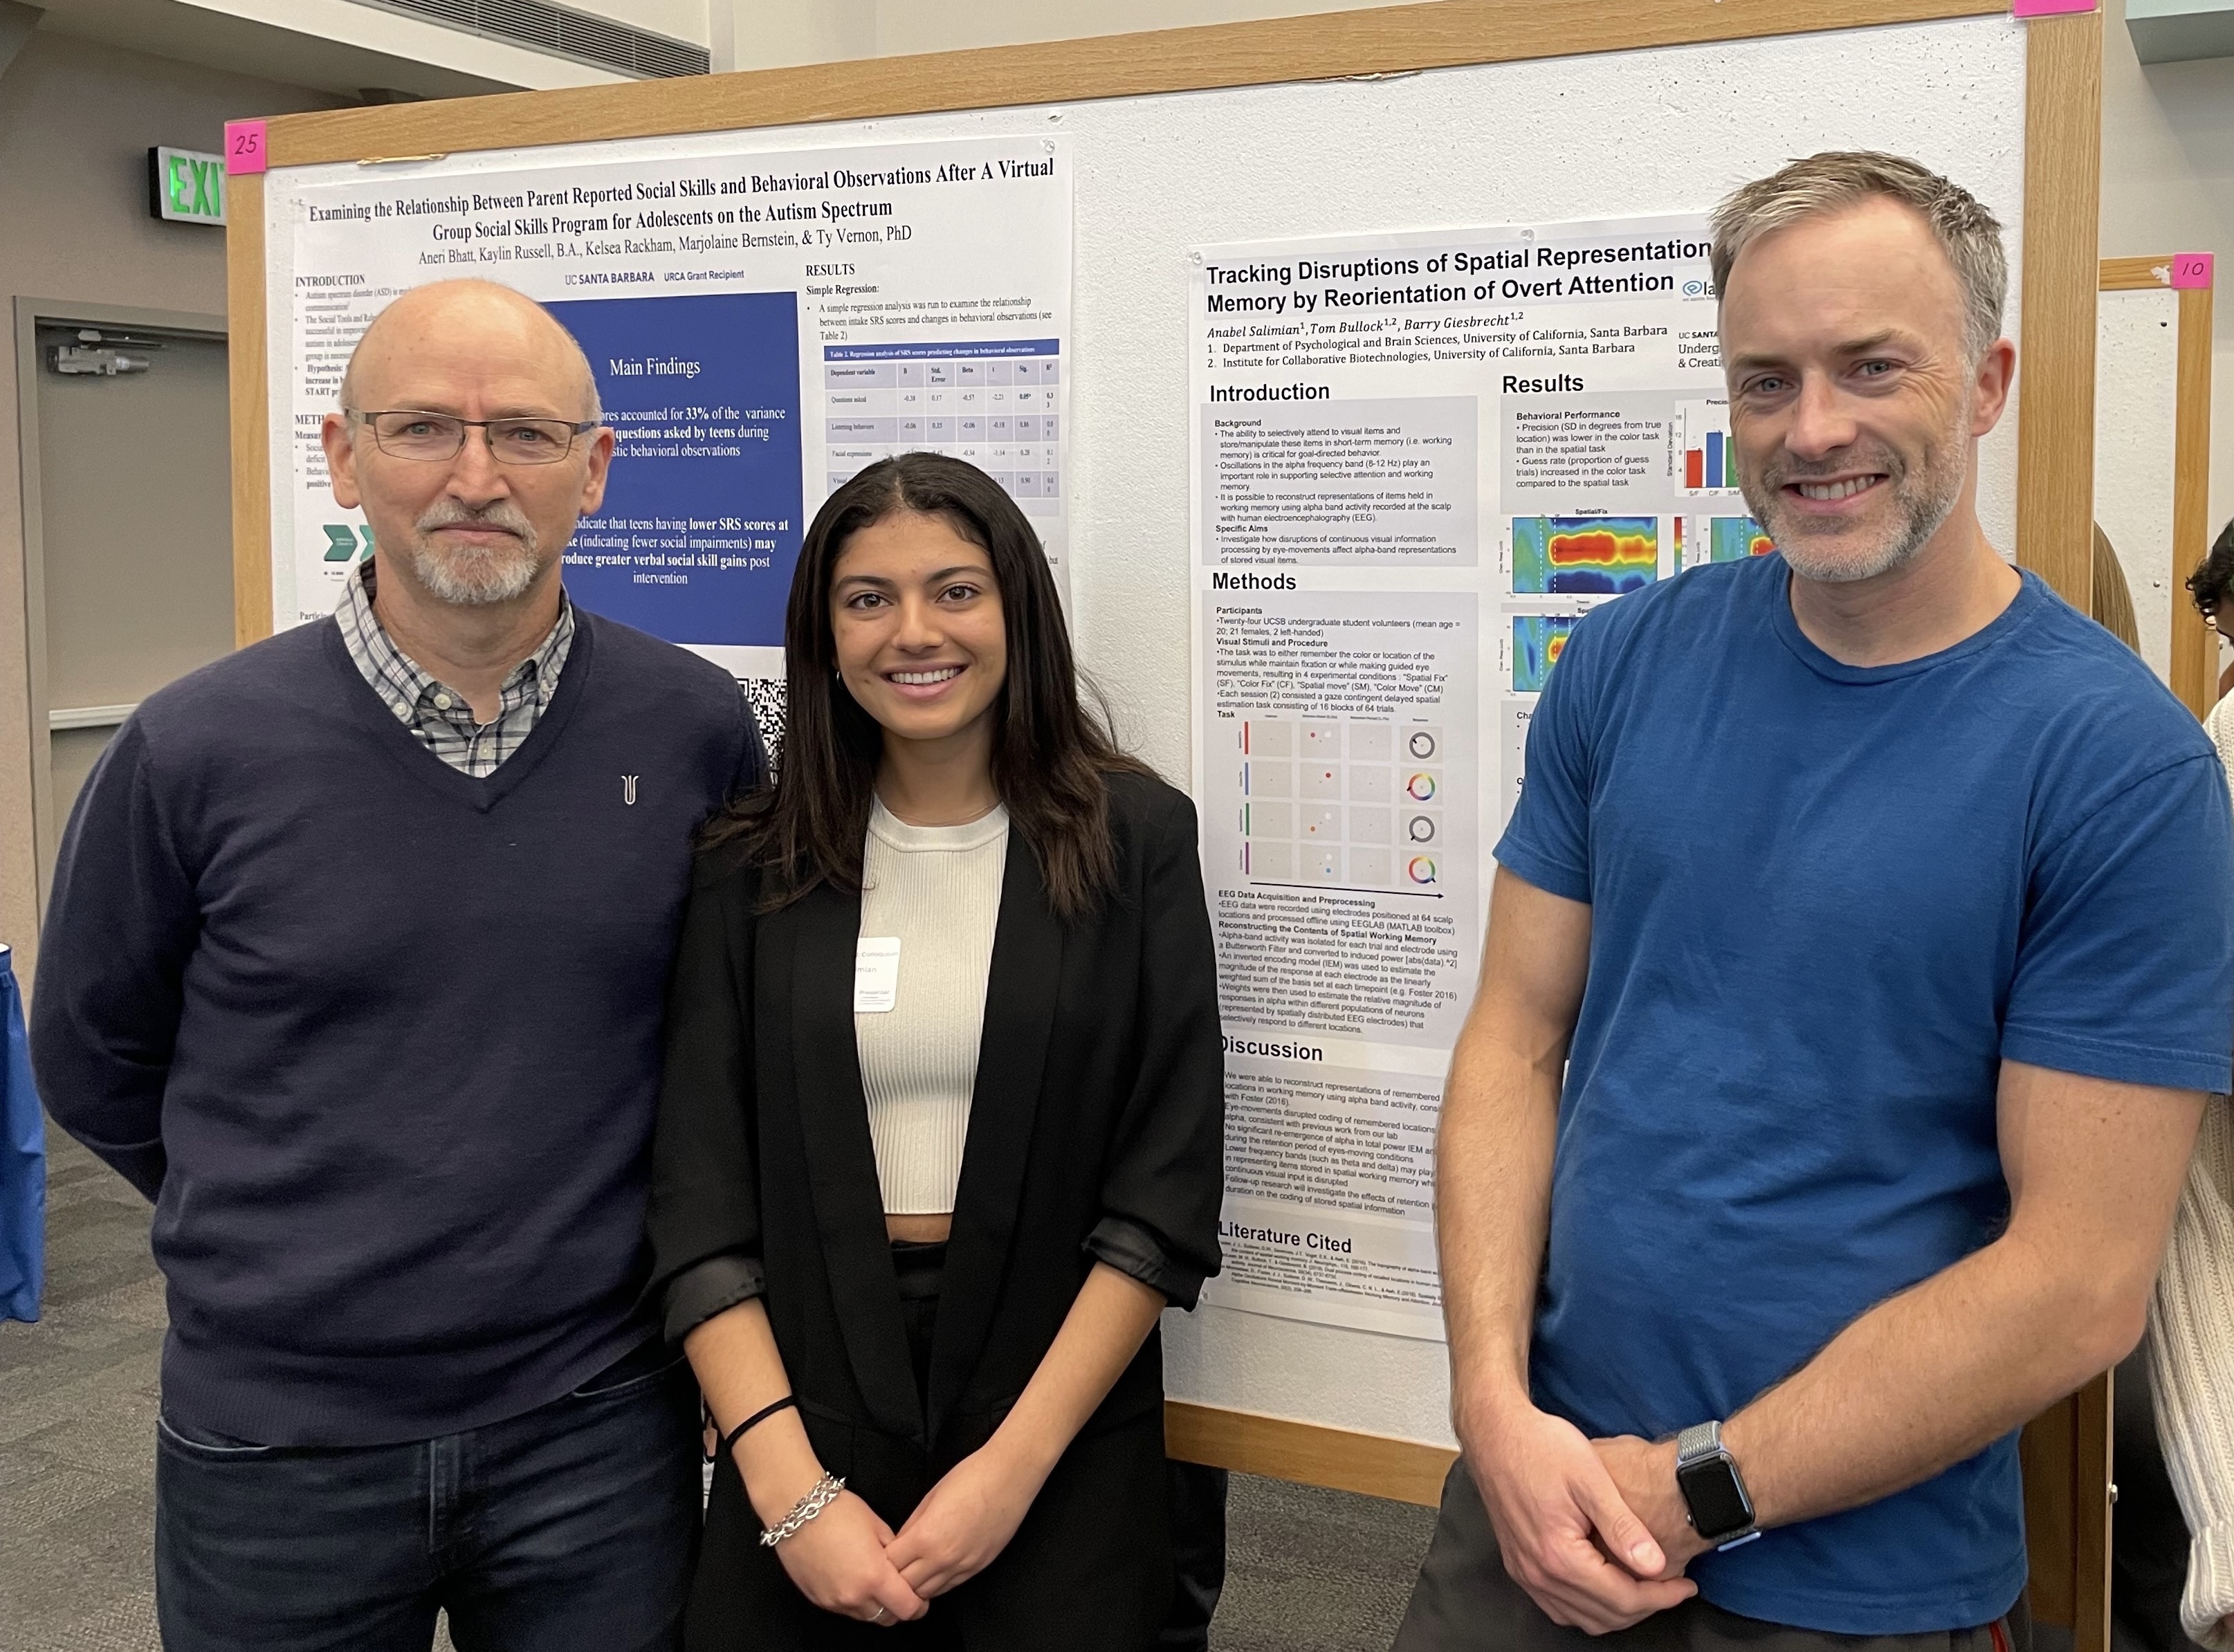 Anabel, Tom, and Barry at the URCA research poster presentations